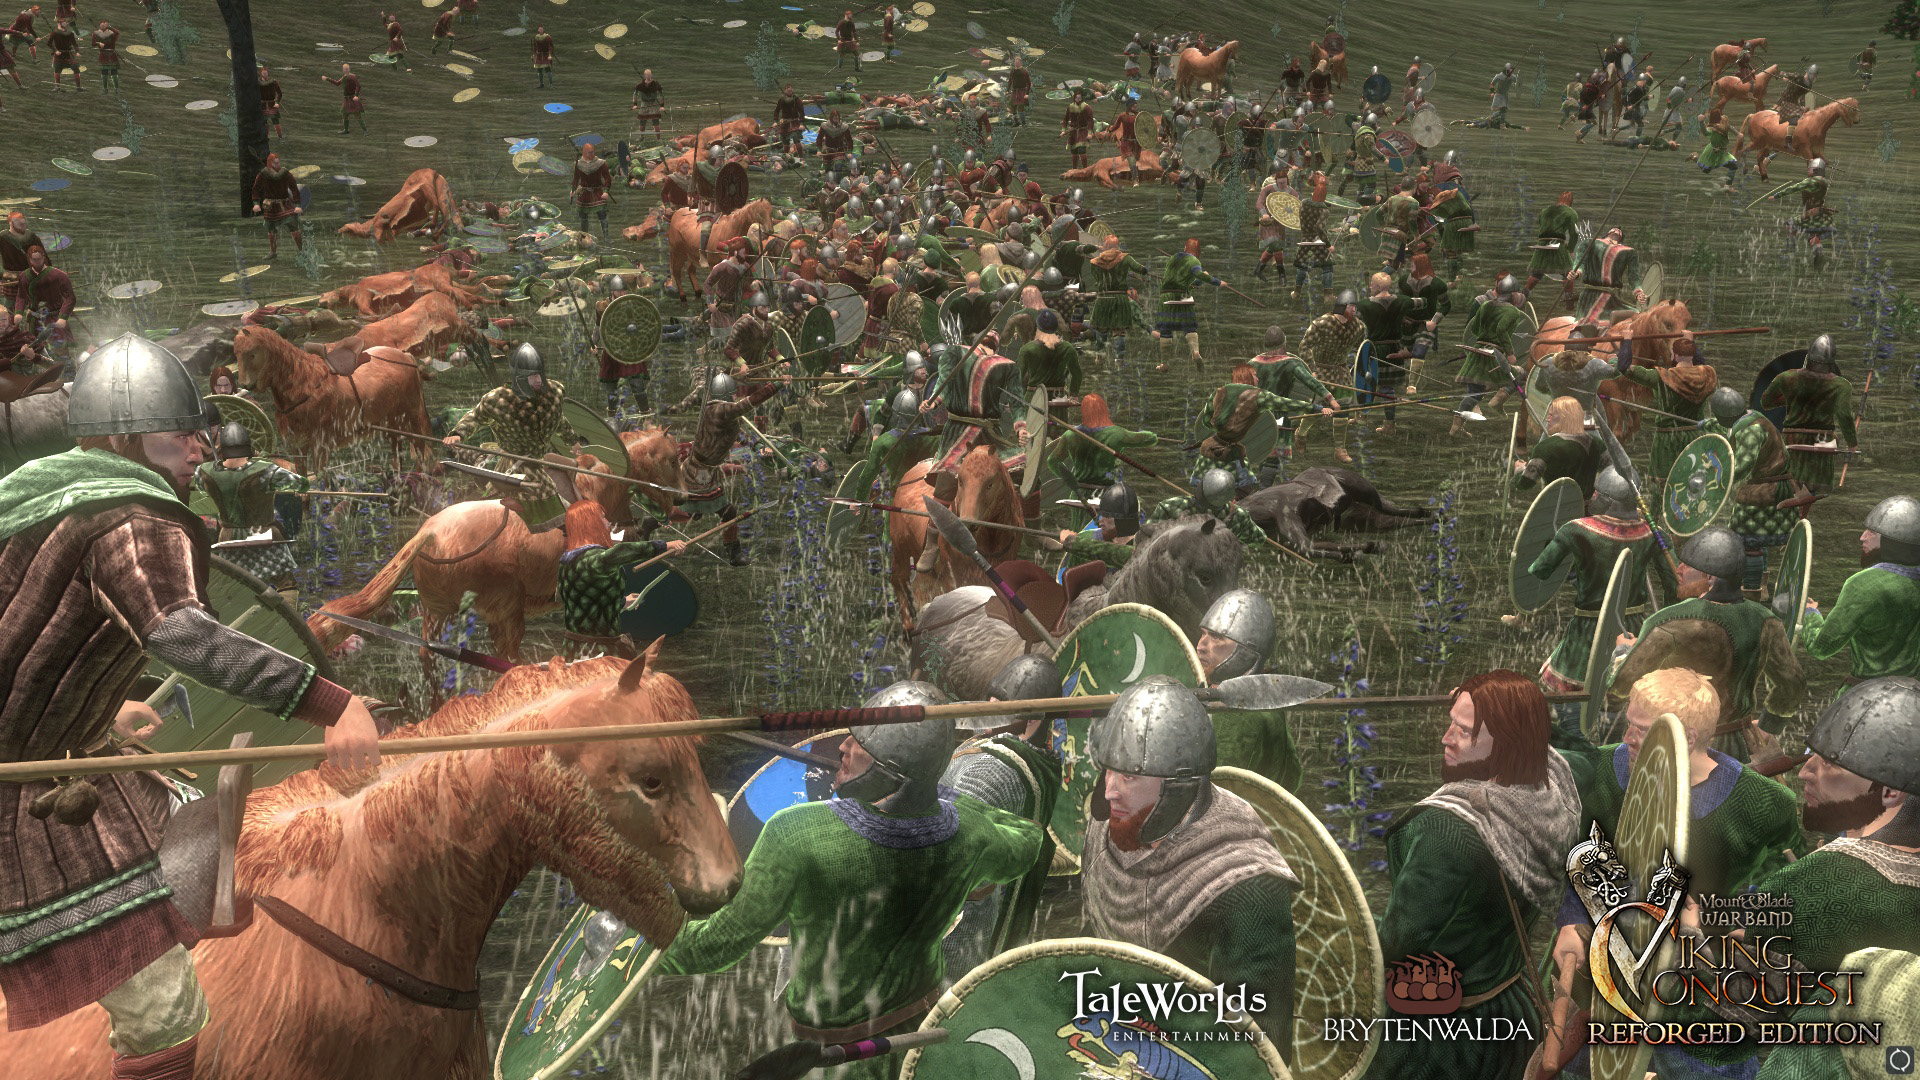 mount and blade viking conquest free download game